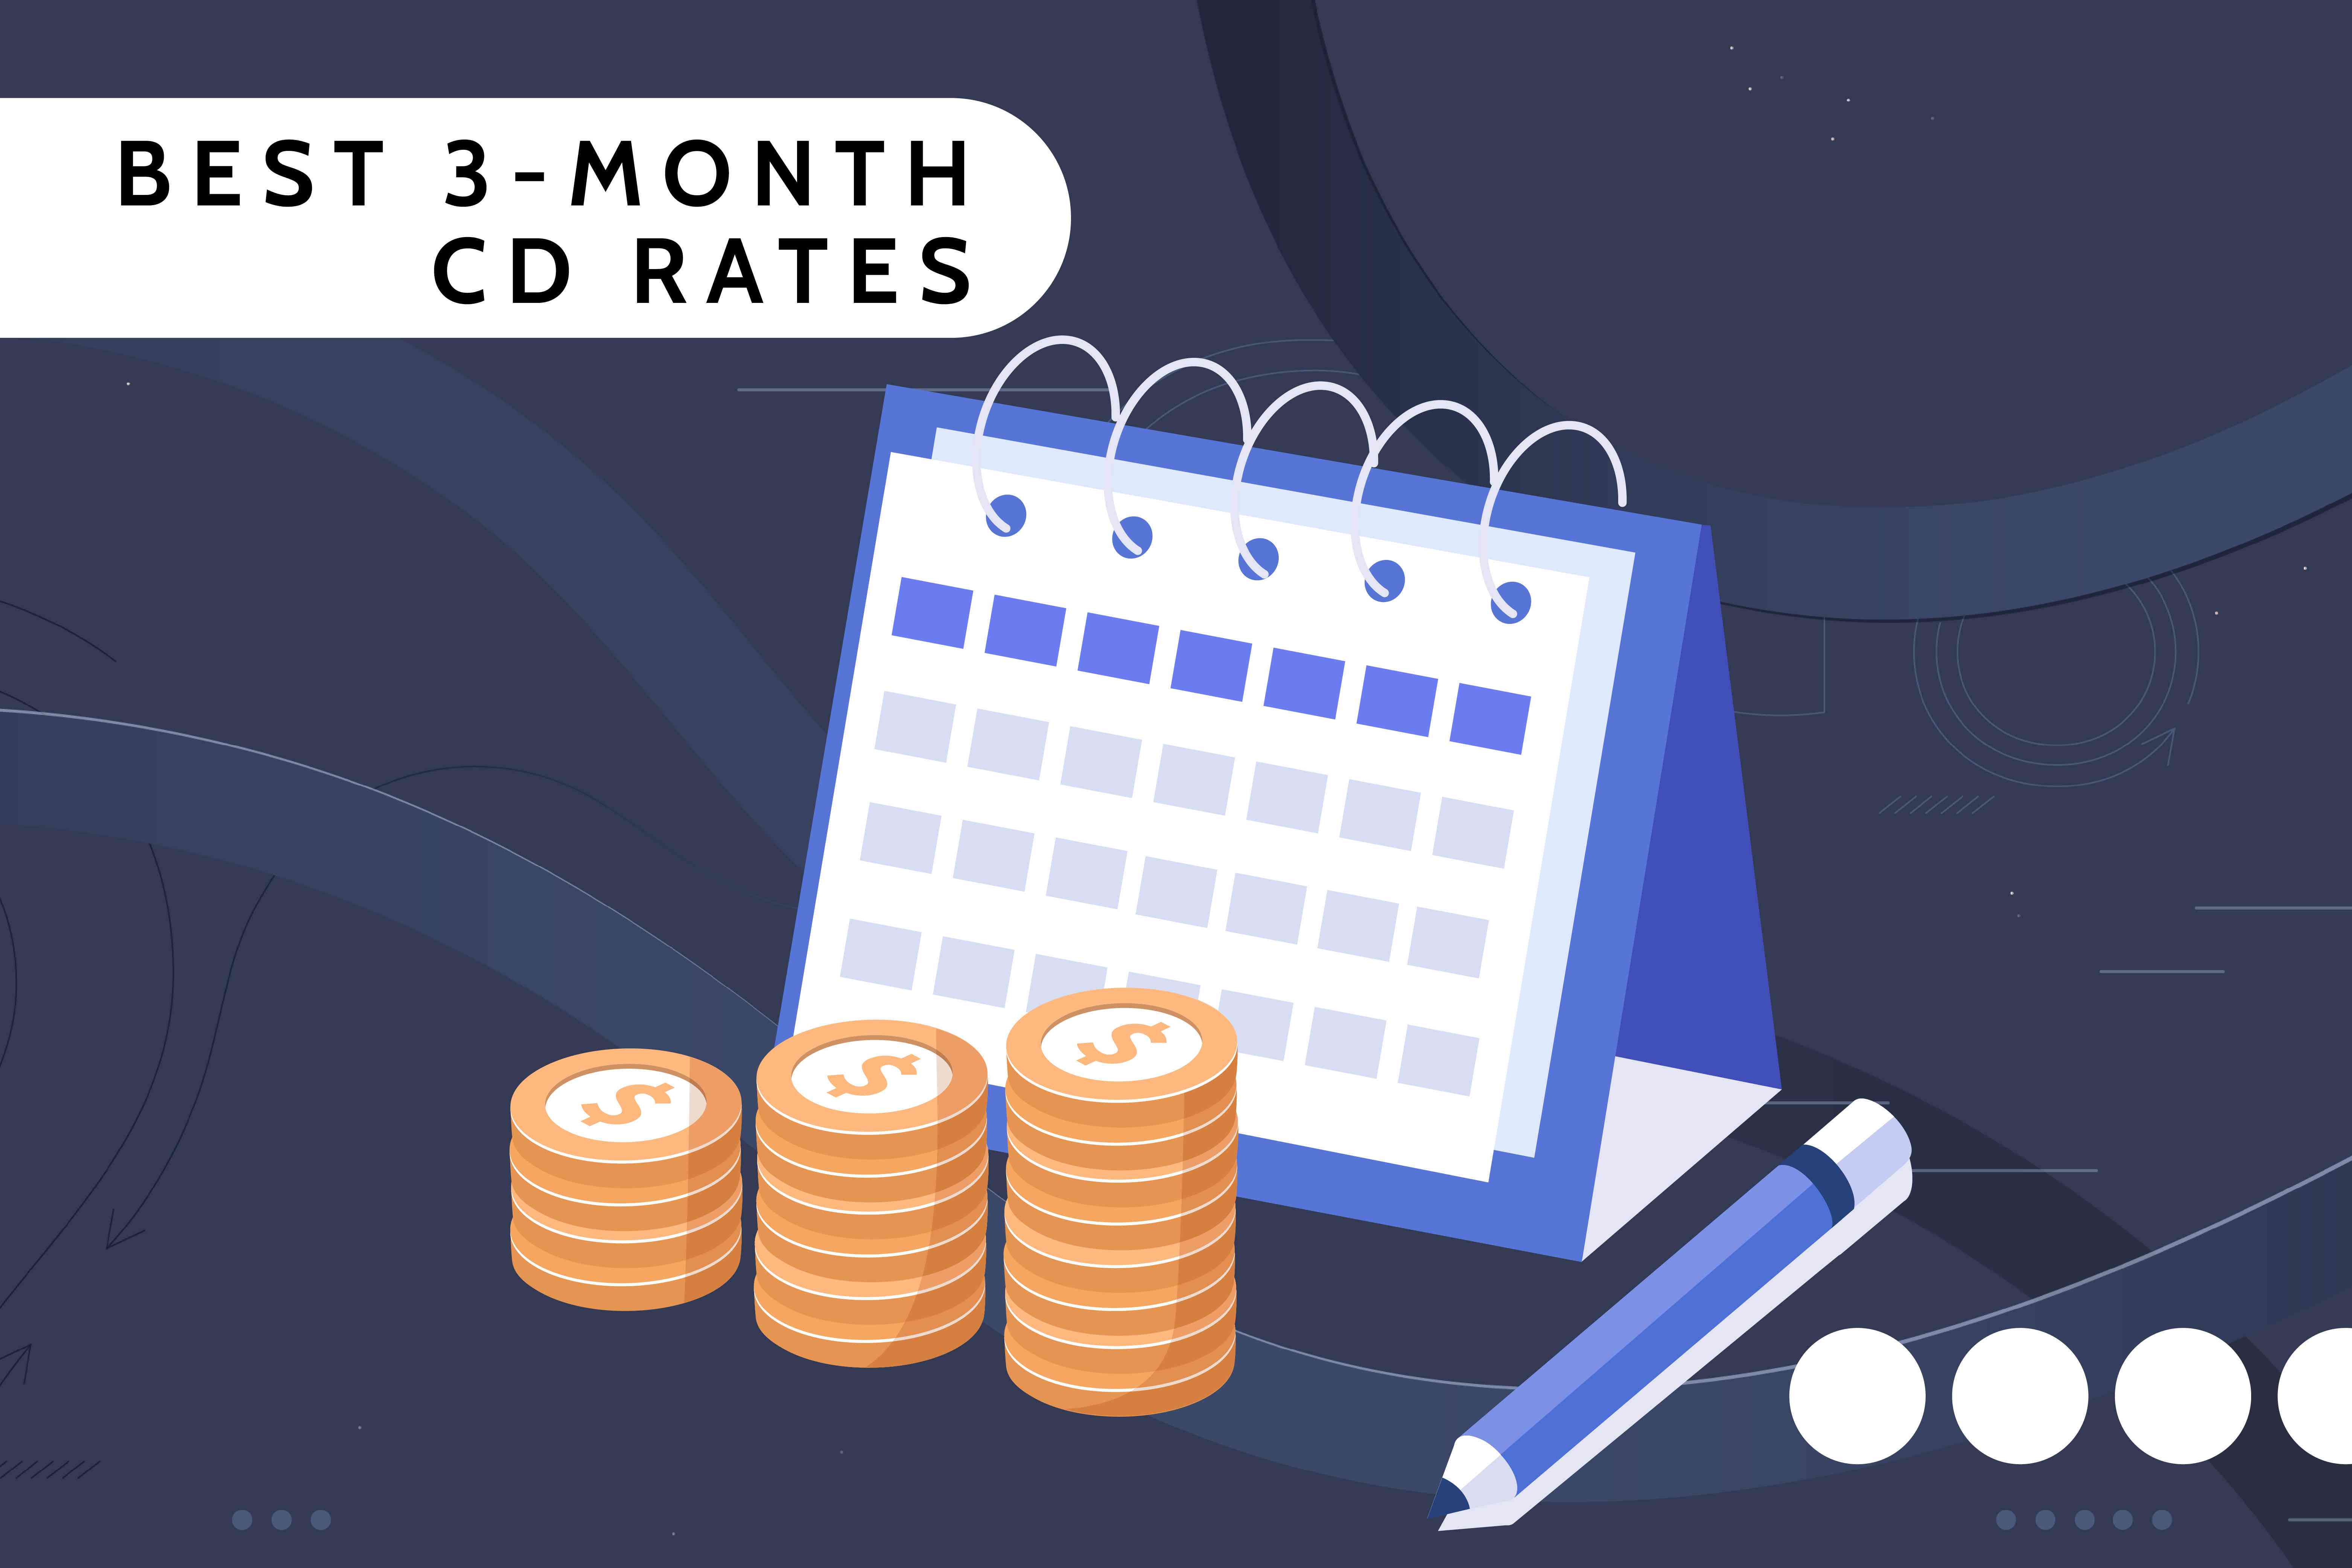 Investopedia custom visual asset shows a calendar and piles of change, with the title Best 3-Month CD Rates